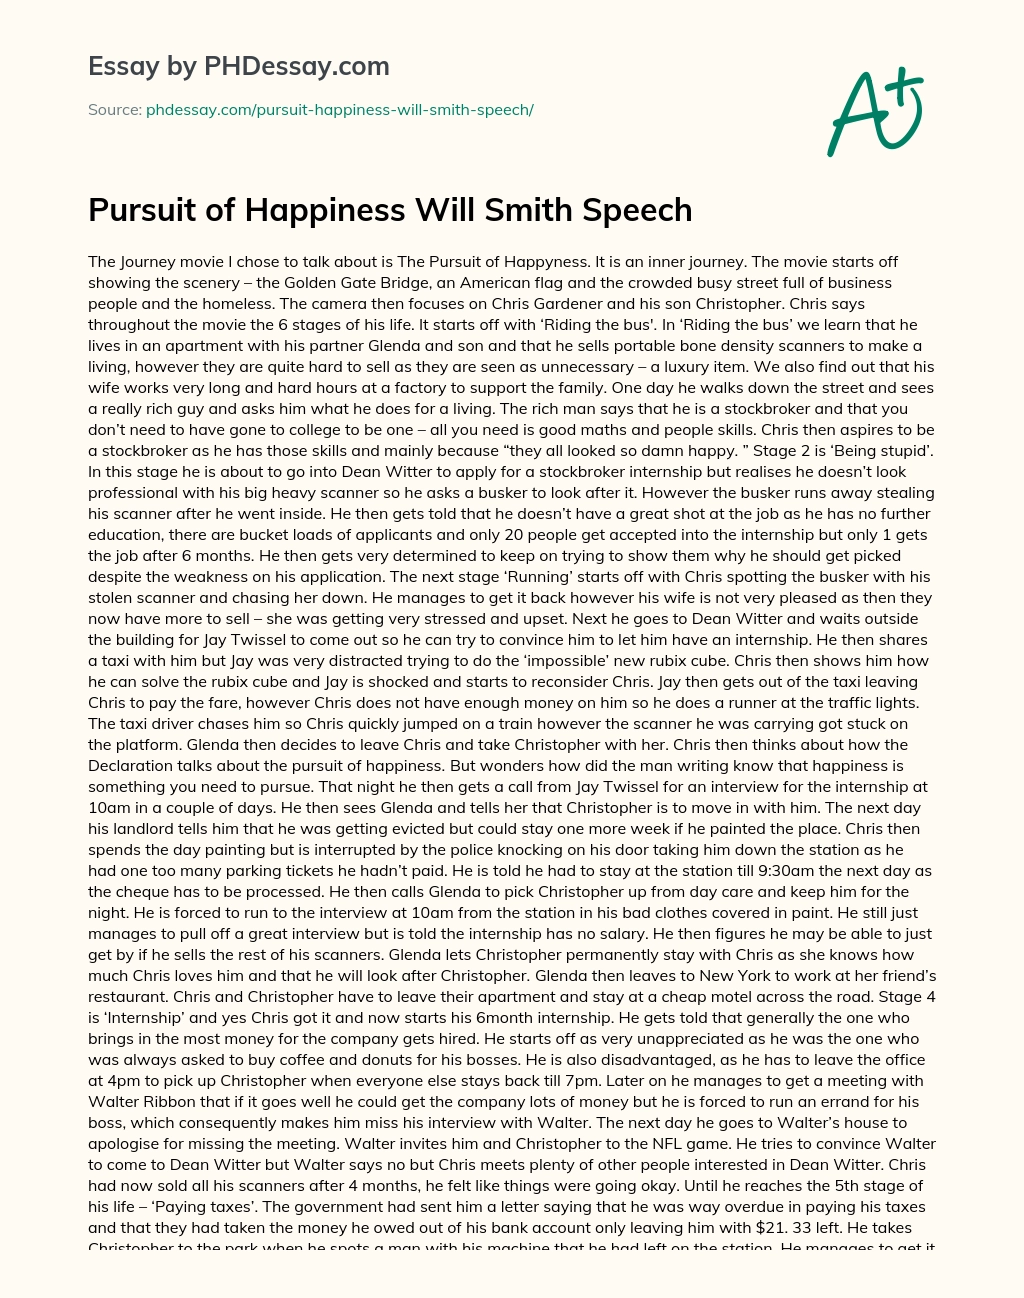 Pursuit of Happiness Will Smith Speech essay